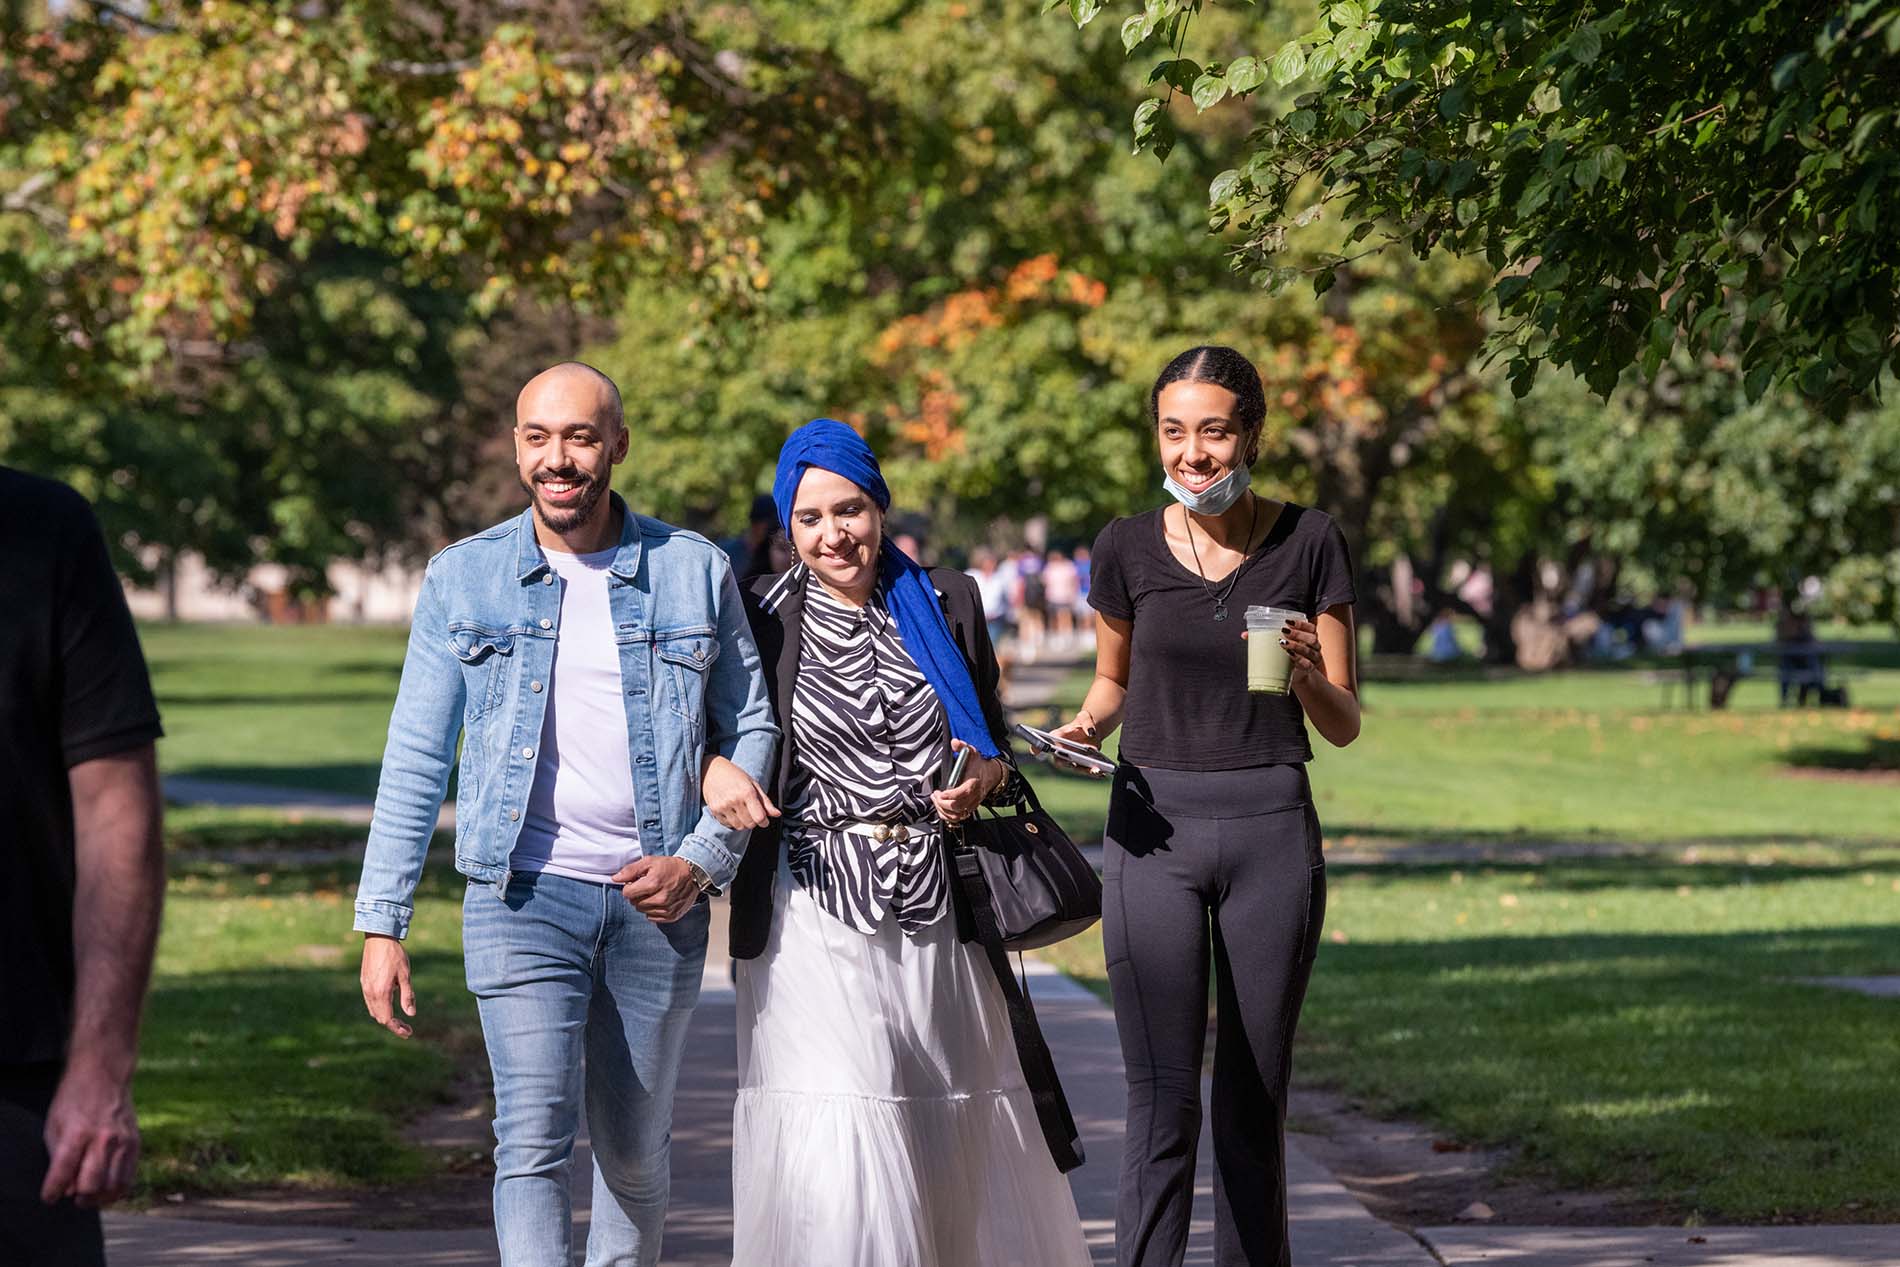 A family of three people walk together. The leftmost person has a shaved head, a beard, and a blue denim jacket. The middle person has a blue headscarf and a black-and-white striped shirt. The rightmost person has long, dark, curly hair and a black shirt. It is a sunny day. Trees with mostly green leaves are visible in the background.